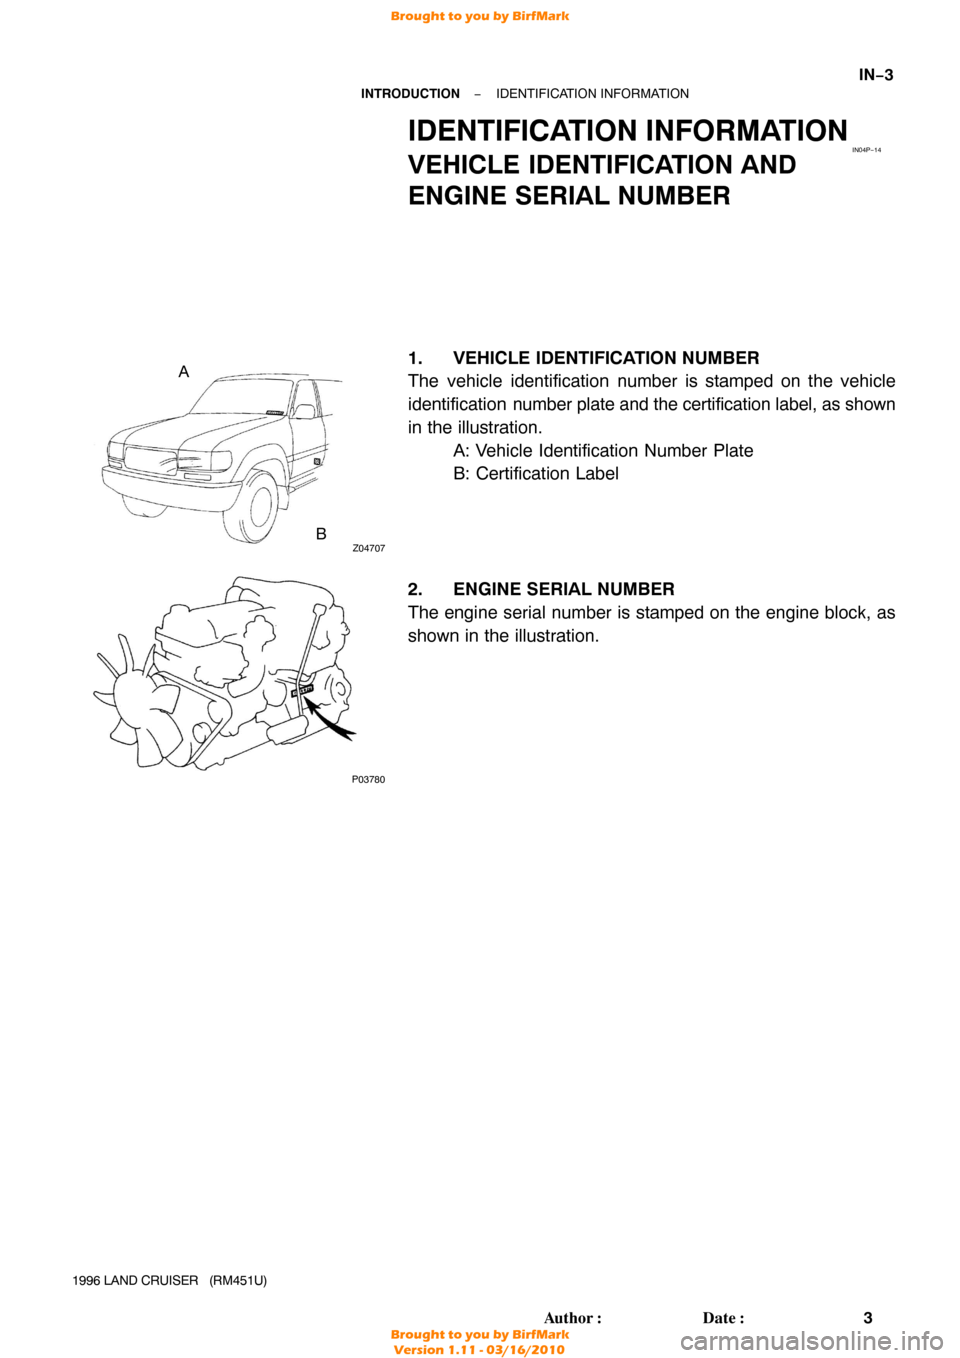 TOYOTA LAND CRUISER 1996 J80 Workshop Manual IN04P−14
Z04707
AB
P03780
−
INTRODUCTION IDENTIFICATION INFORMATION
IN−3
3
Author: Date:
1996 LAND CRUISER   (RM451U)
IDENTIFICATION INFORMATION
VEHICLE IDENTIFICATION AND
ENGINE SERIAL NUMBER